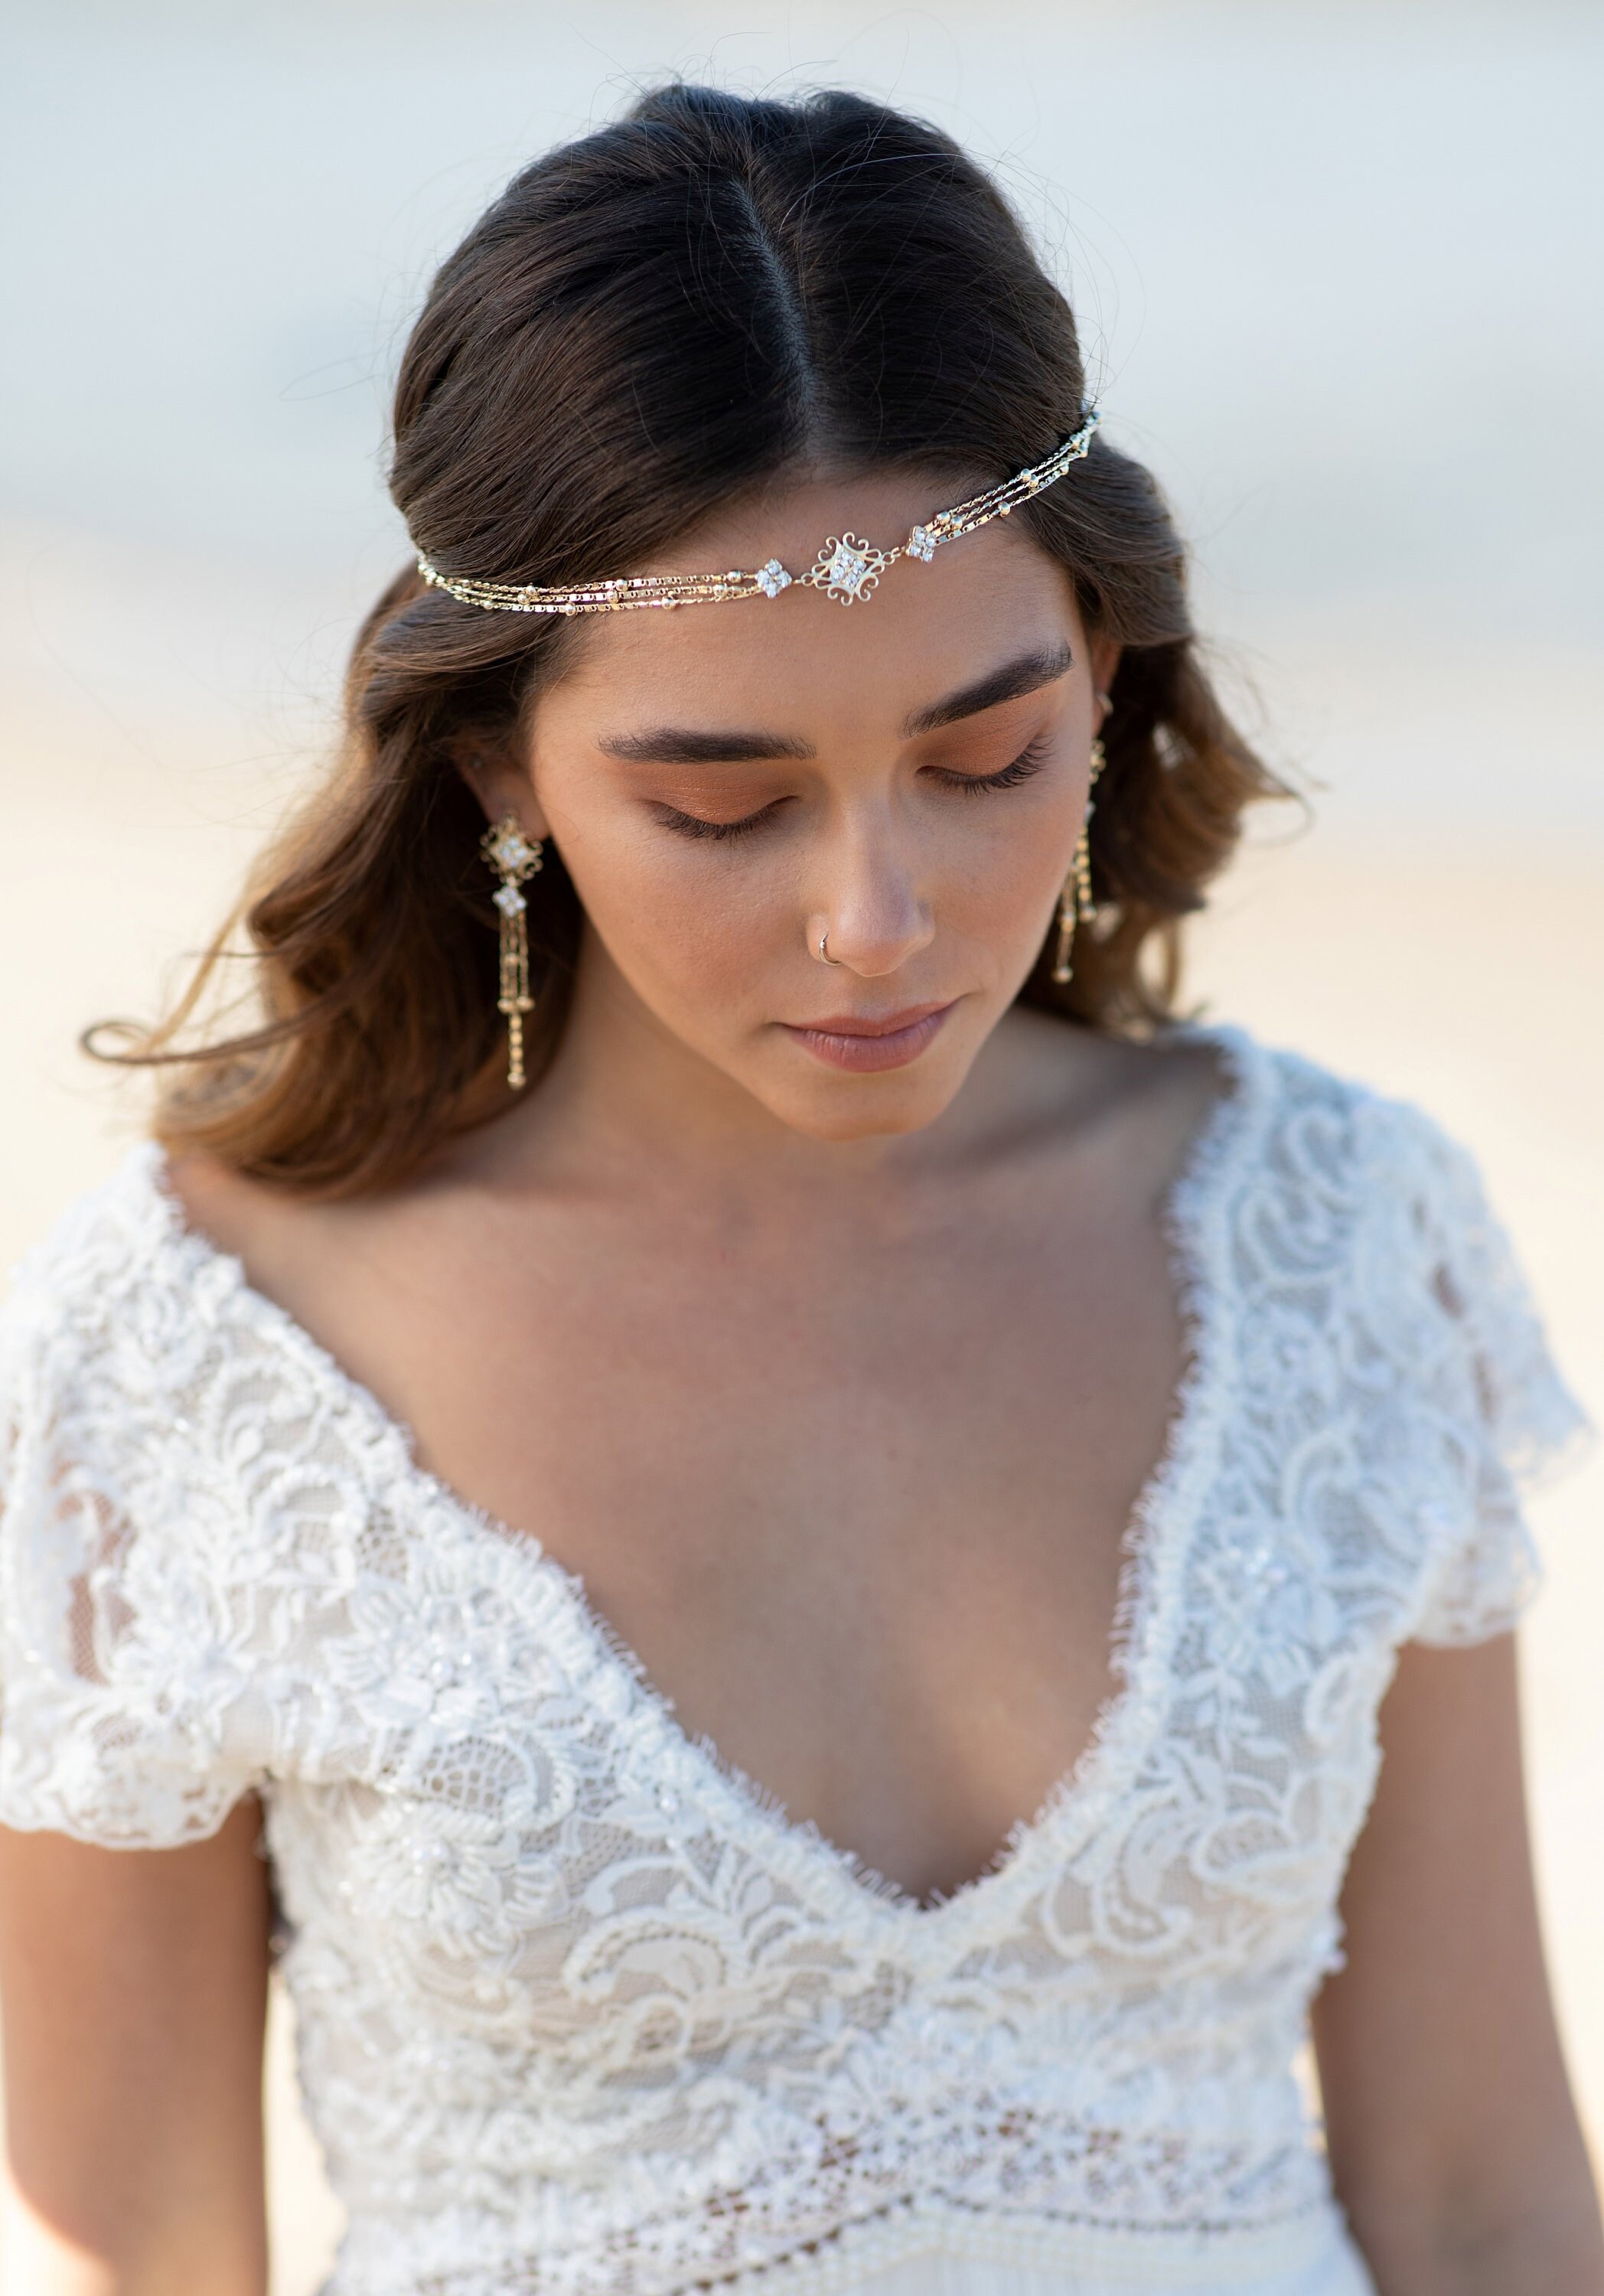 17 gorgeous bridal hair accessories from David's Bridal, Revolve